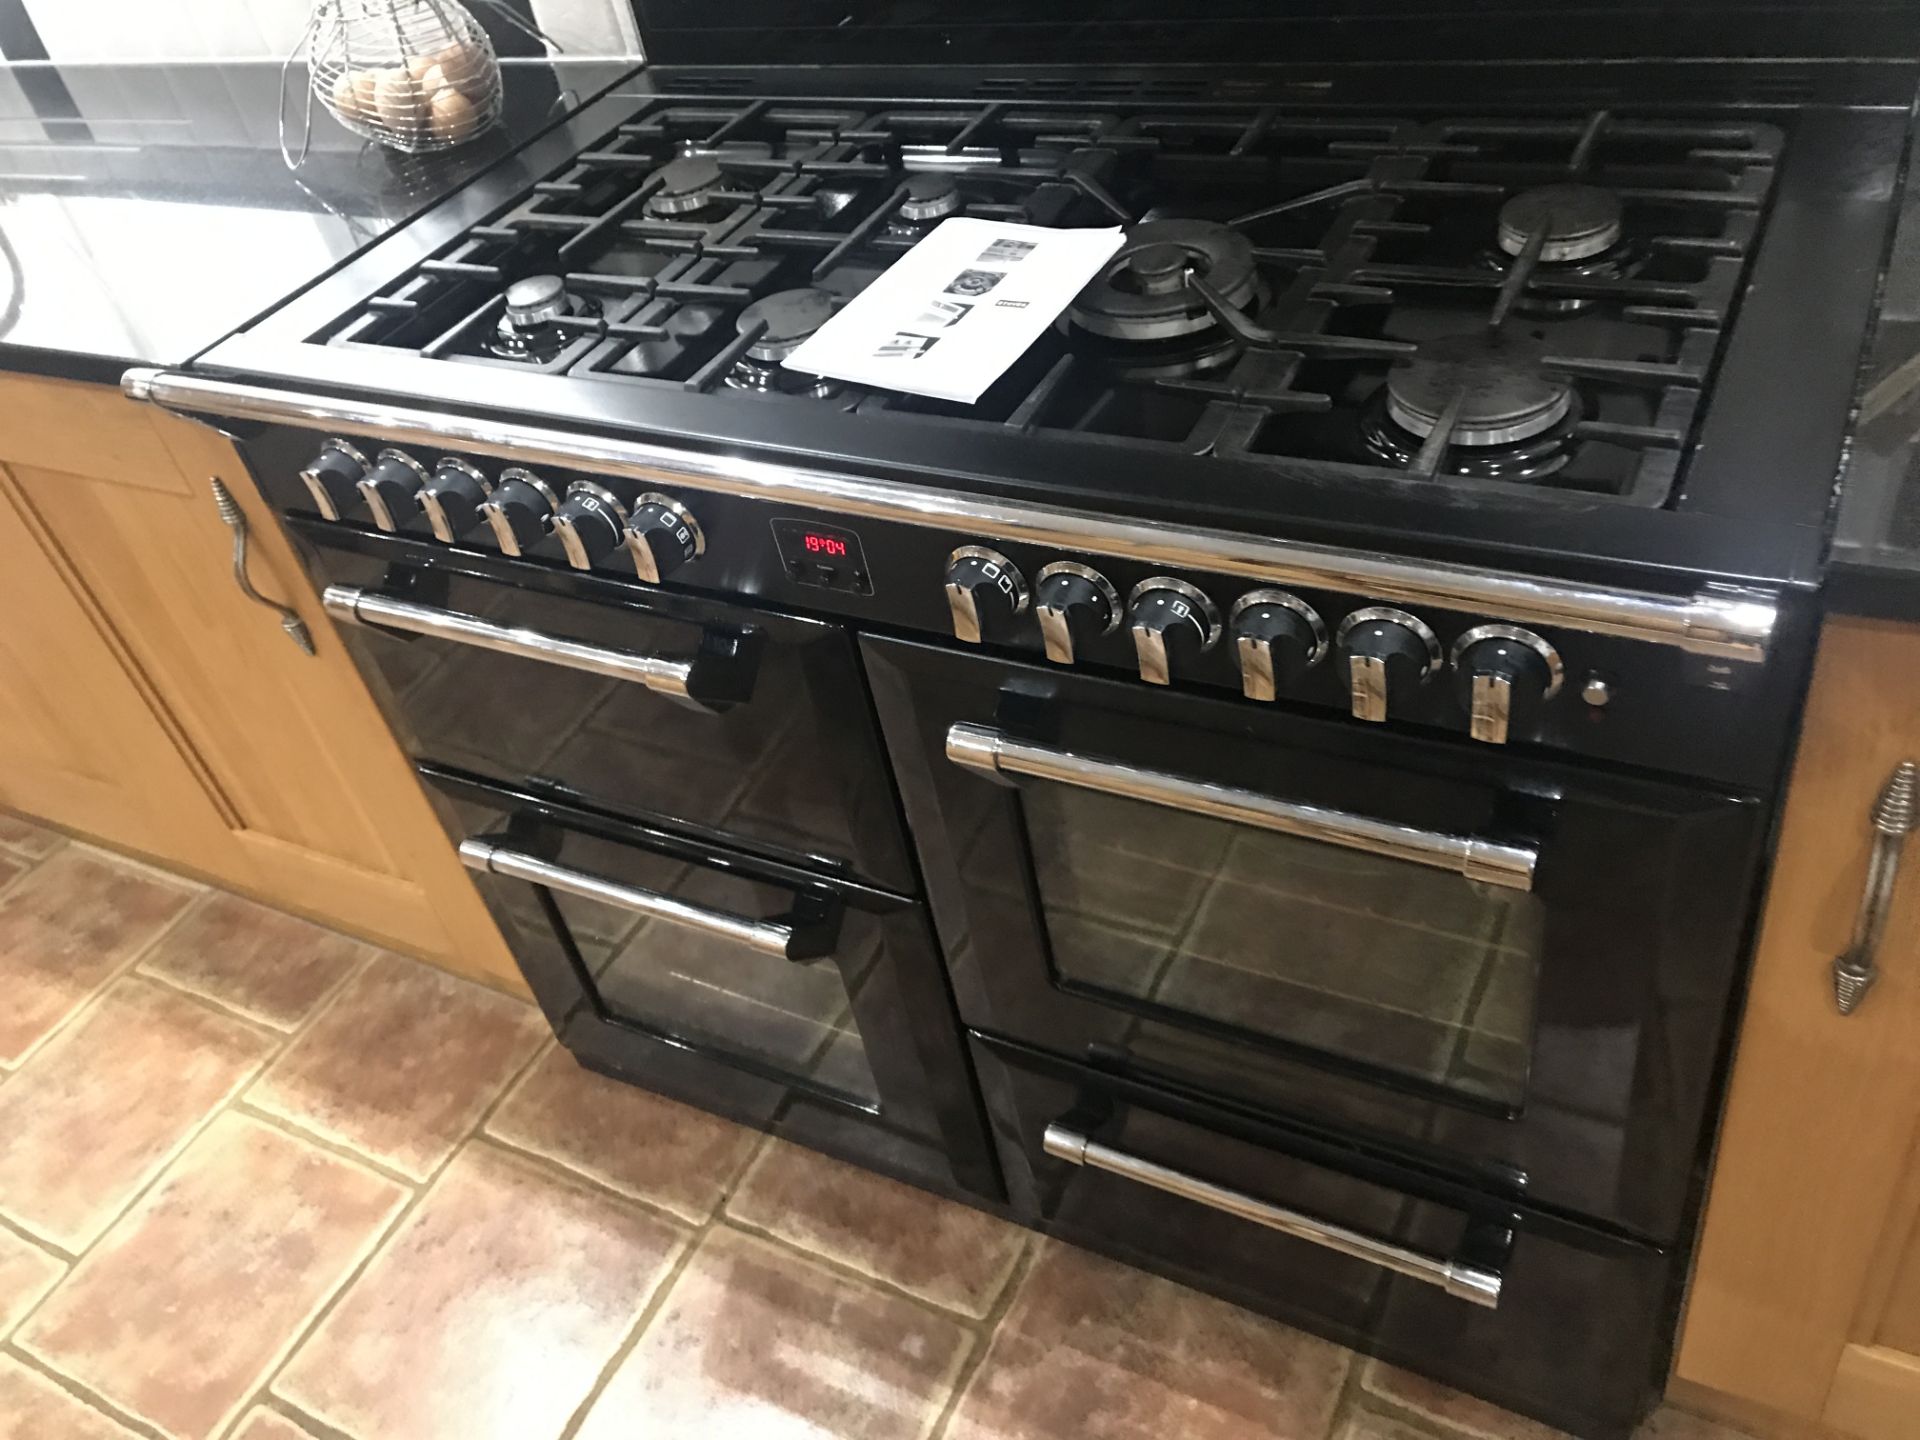 1 x Stoves Richmond 1100DF Dual Fuel Range Cooker With Matching Extractor Hood - Black Finish With 4 - Image 7 of 18